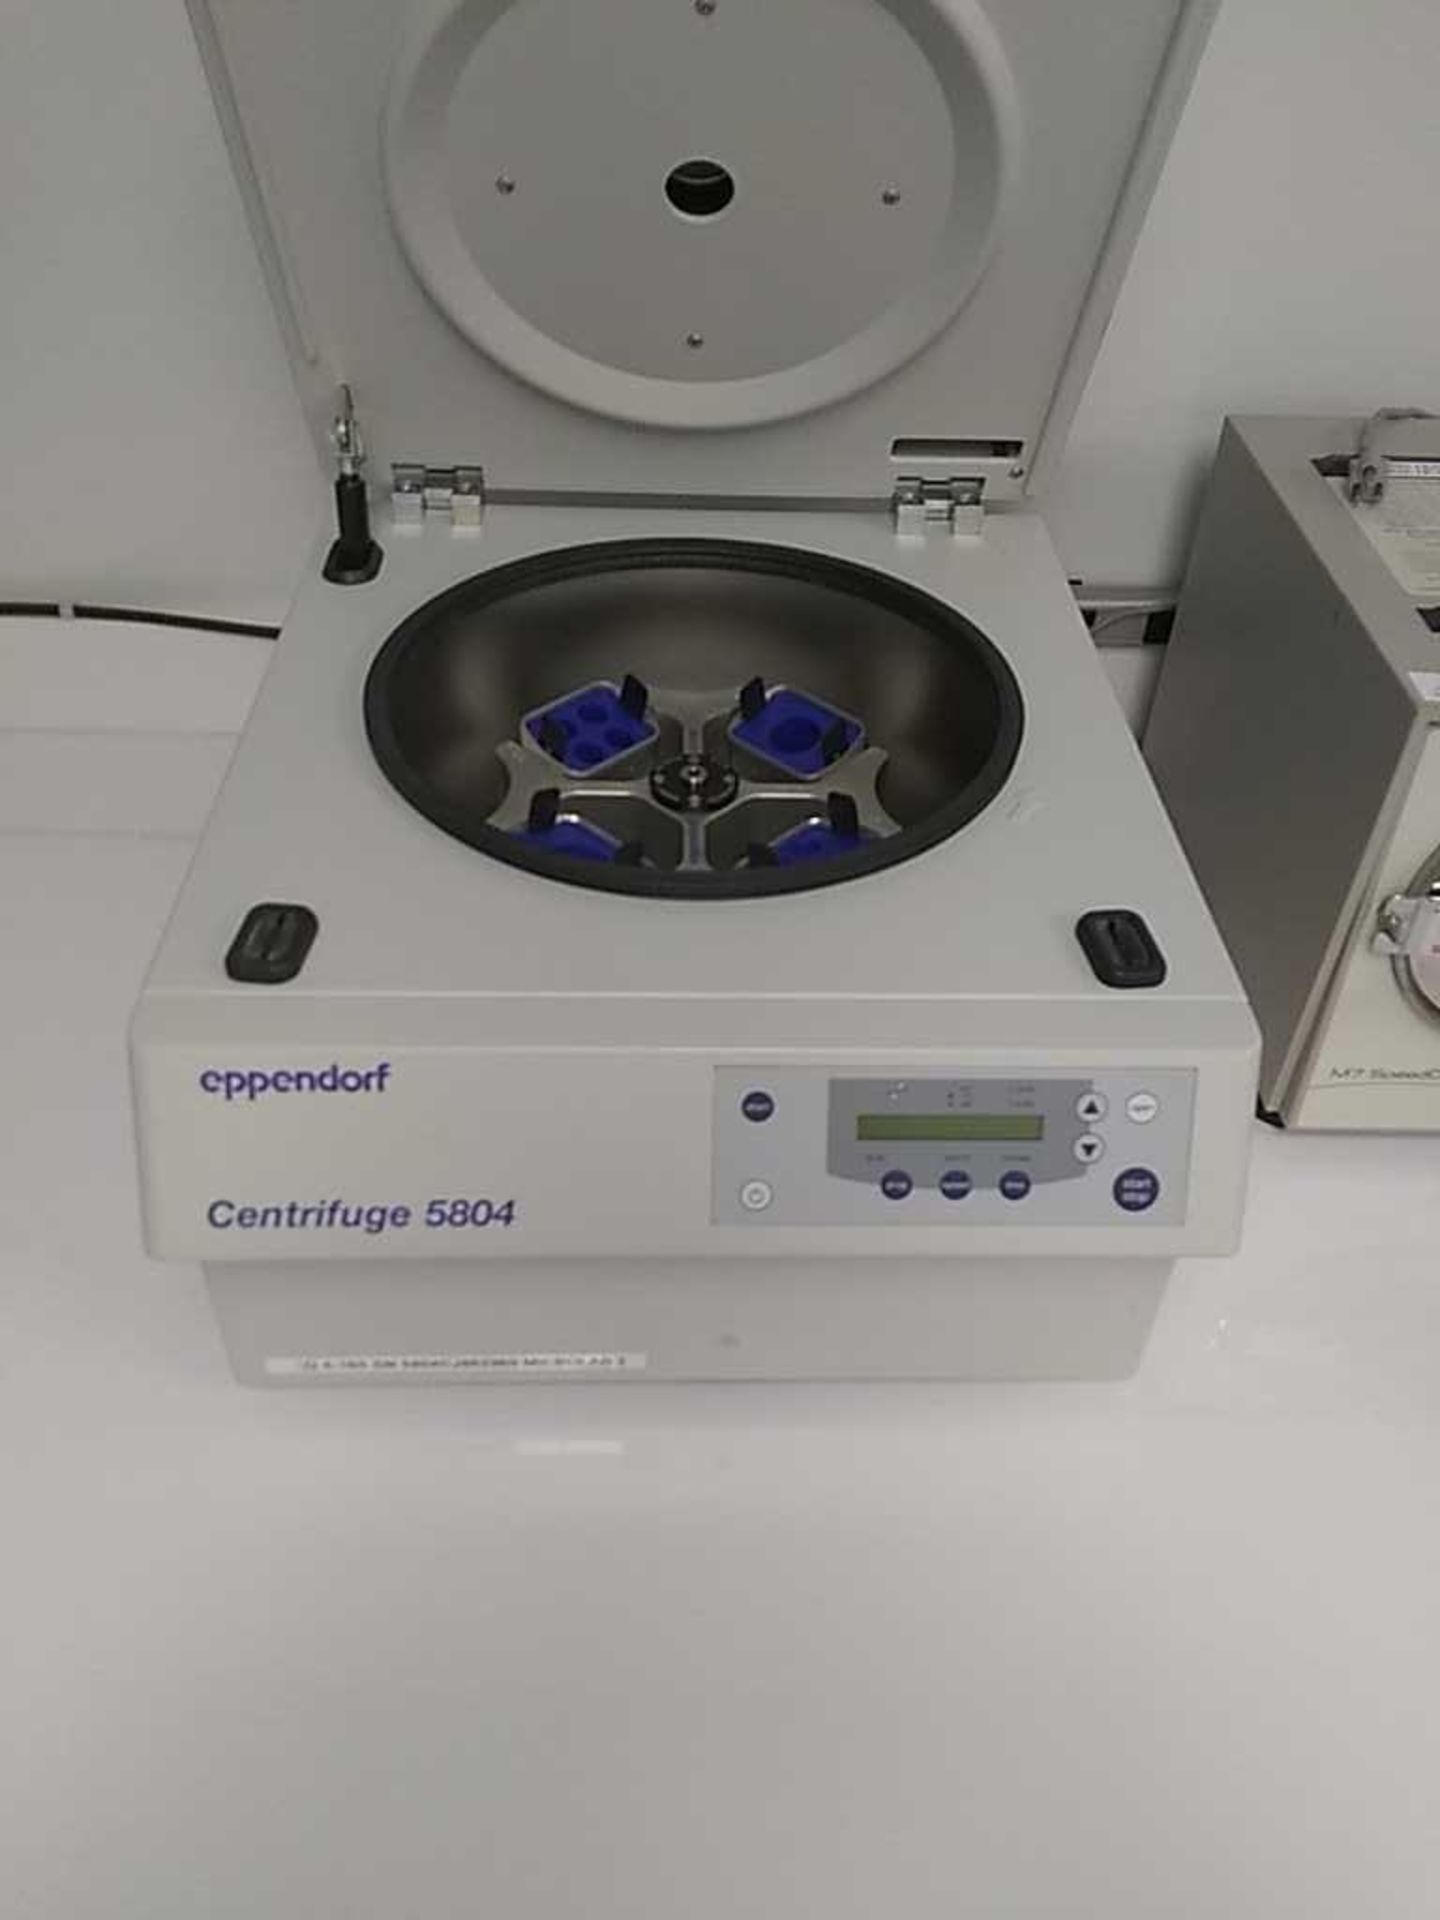 Eppendorf 5804 Benchtop Centrifuge With Rotor - Image 2 of 7